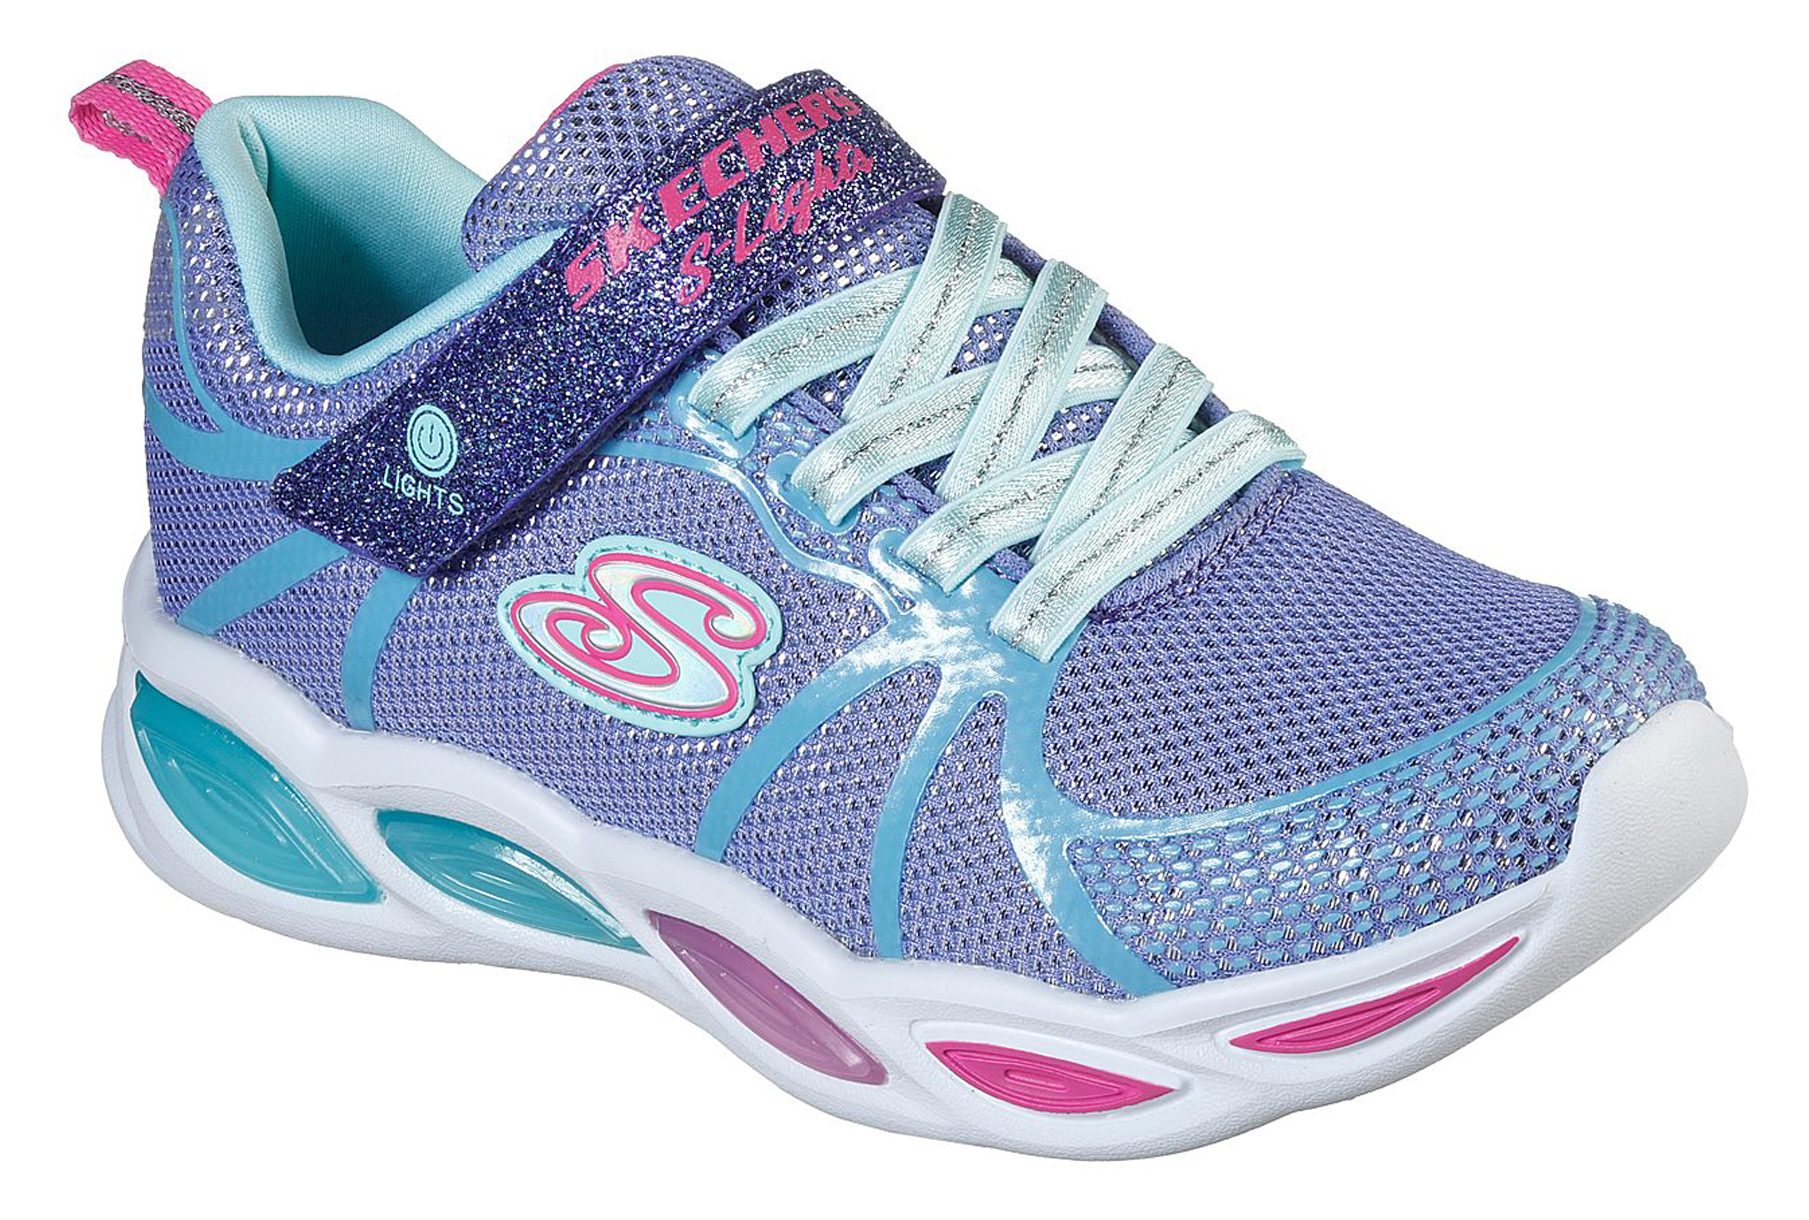 Skechers S Lights: Beams - Sporty / Multi 302042L PWMT - Girls Trainers - Humphries Shoes